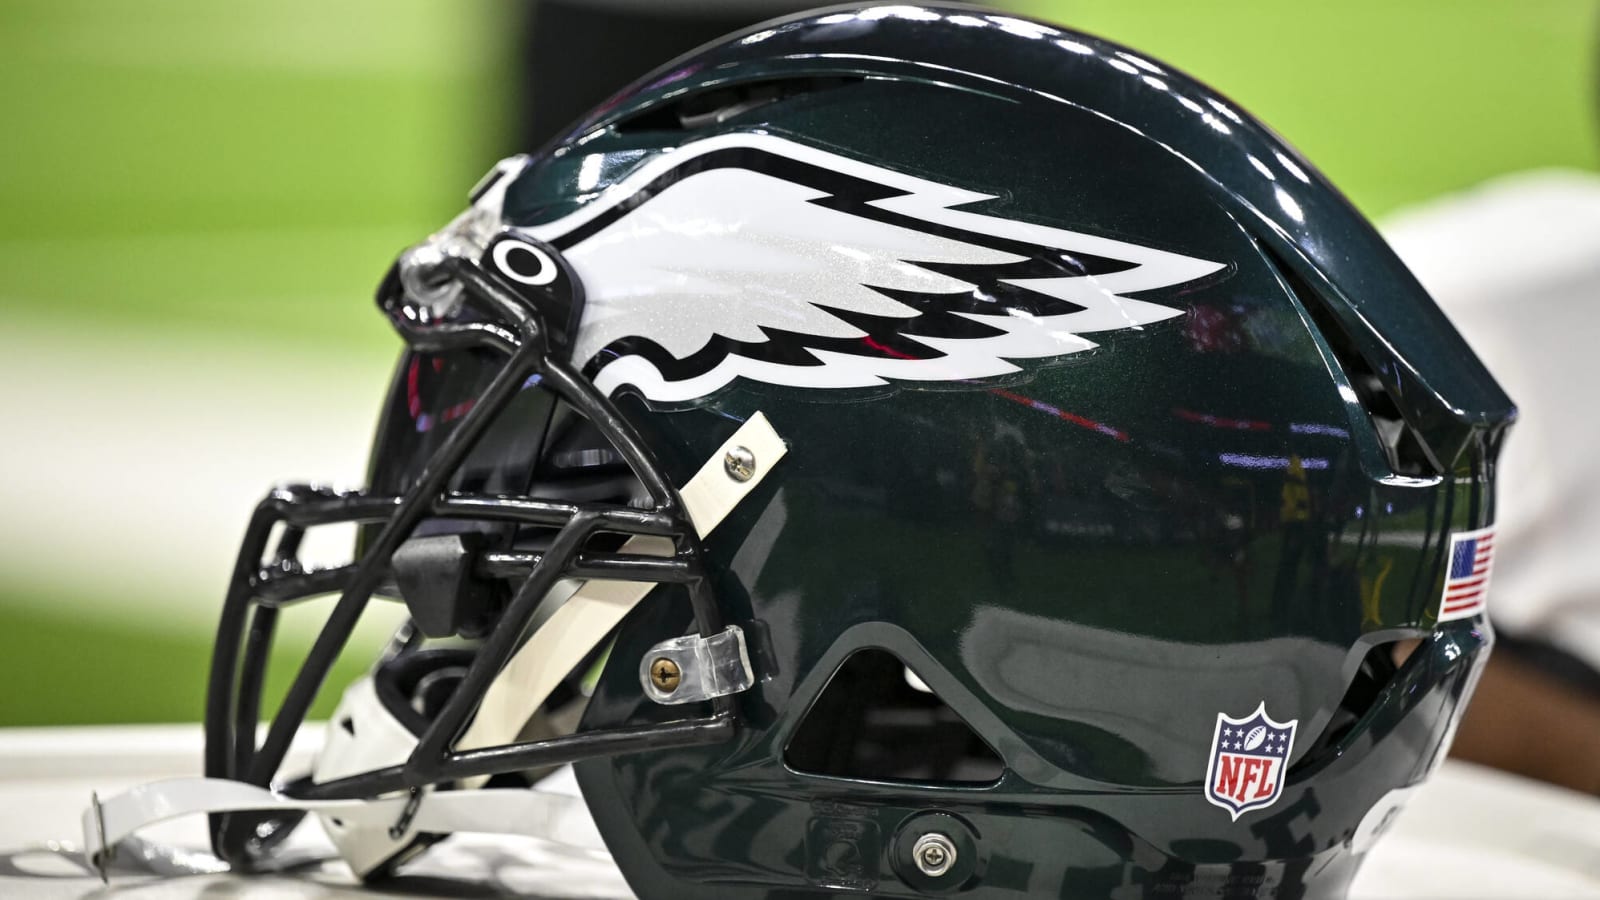 Why Did the Eagles' Uniforms Change? Explaining the Kelly Green